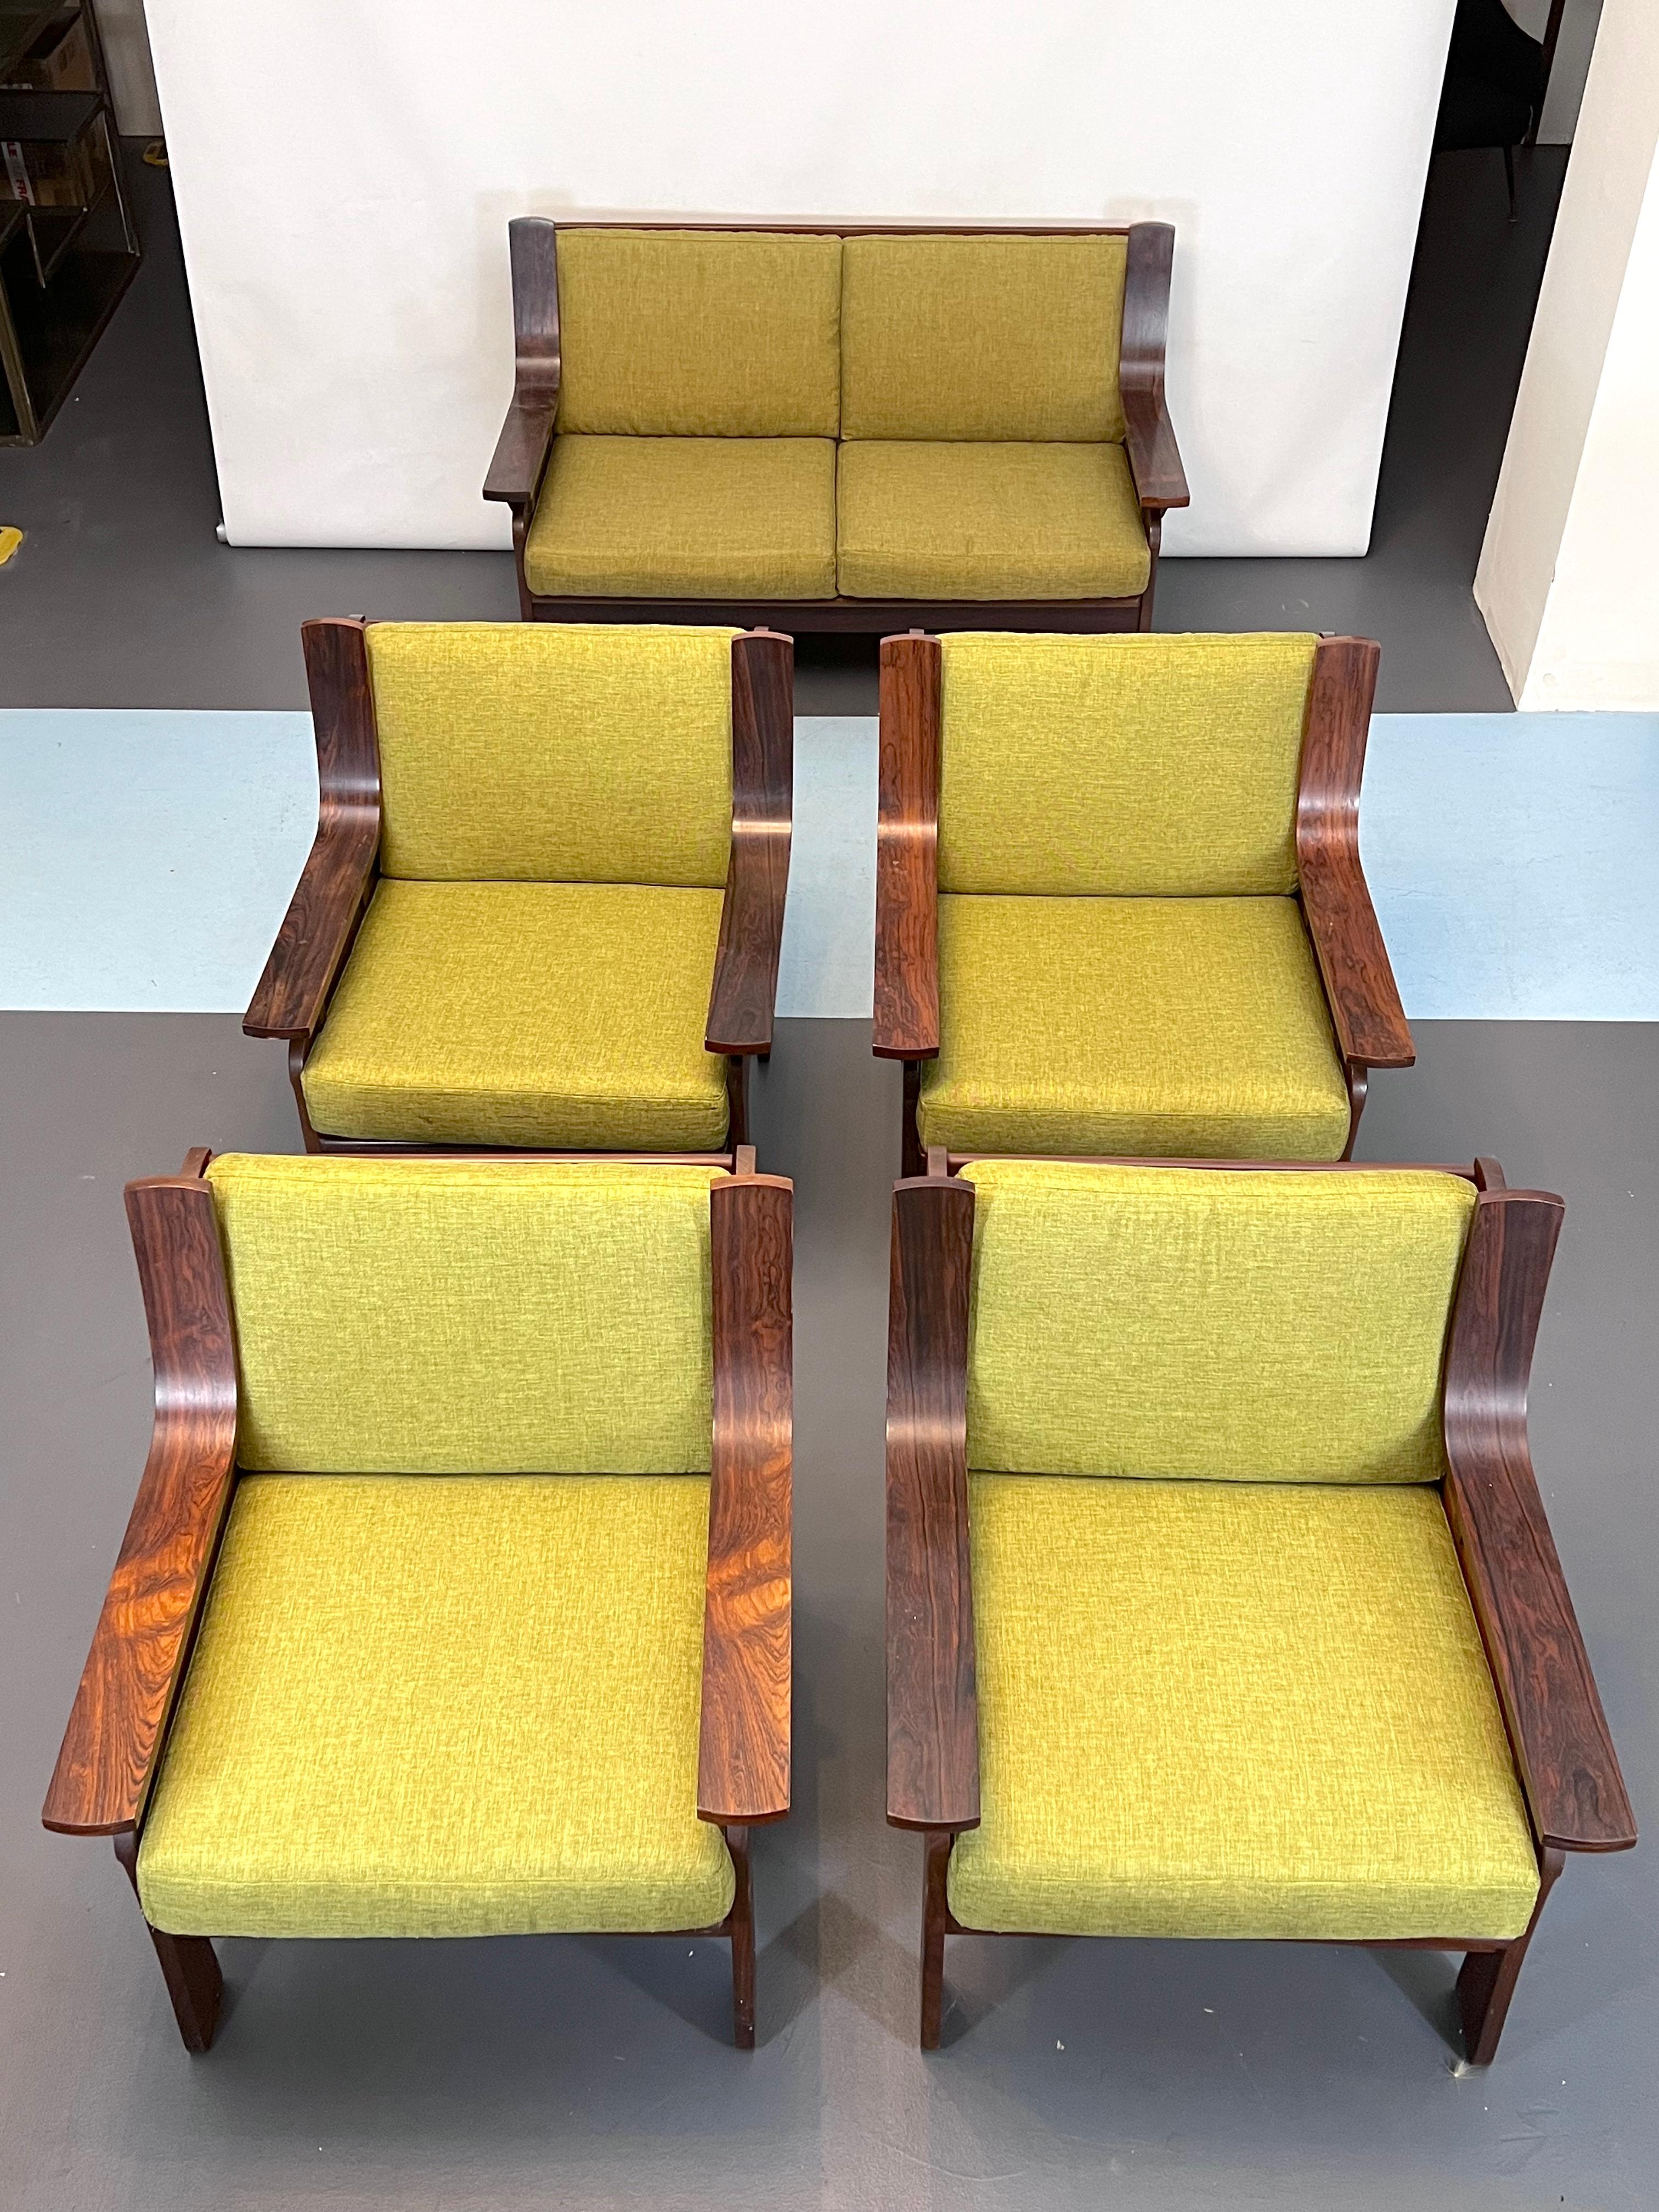 Great vintage condition with normal trace of age and use. The set consists of 4 armchairs and a two-seater sofa, made from wood and green fabric. Produced in Italy during the 60s. Measures: Armchair dimensions H 79 W 72 D 72, Sofa dimensions H 79 W